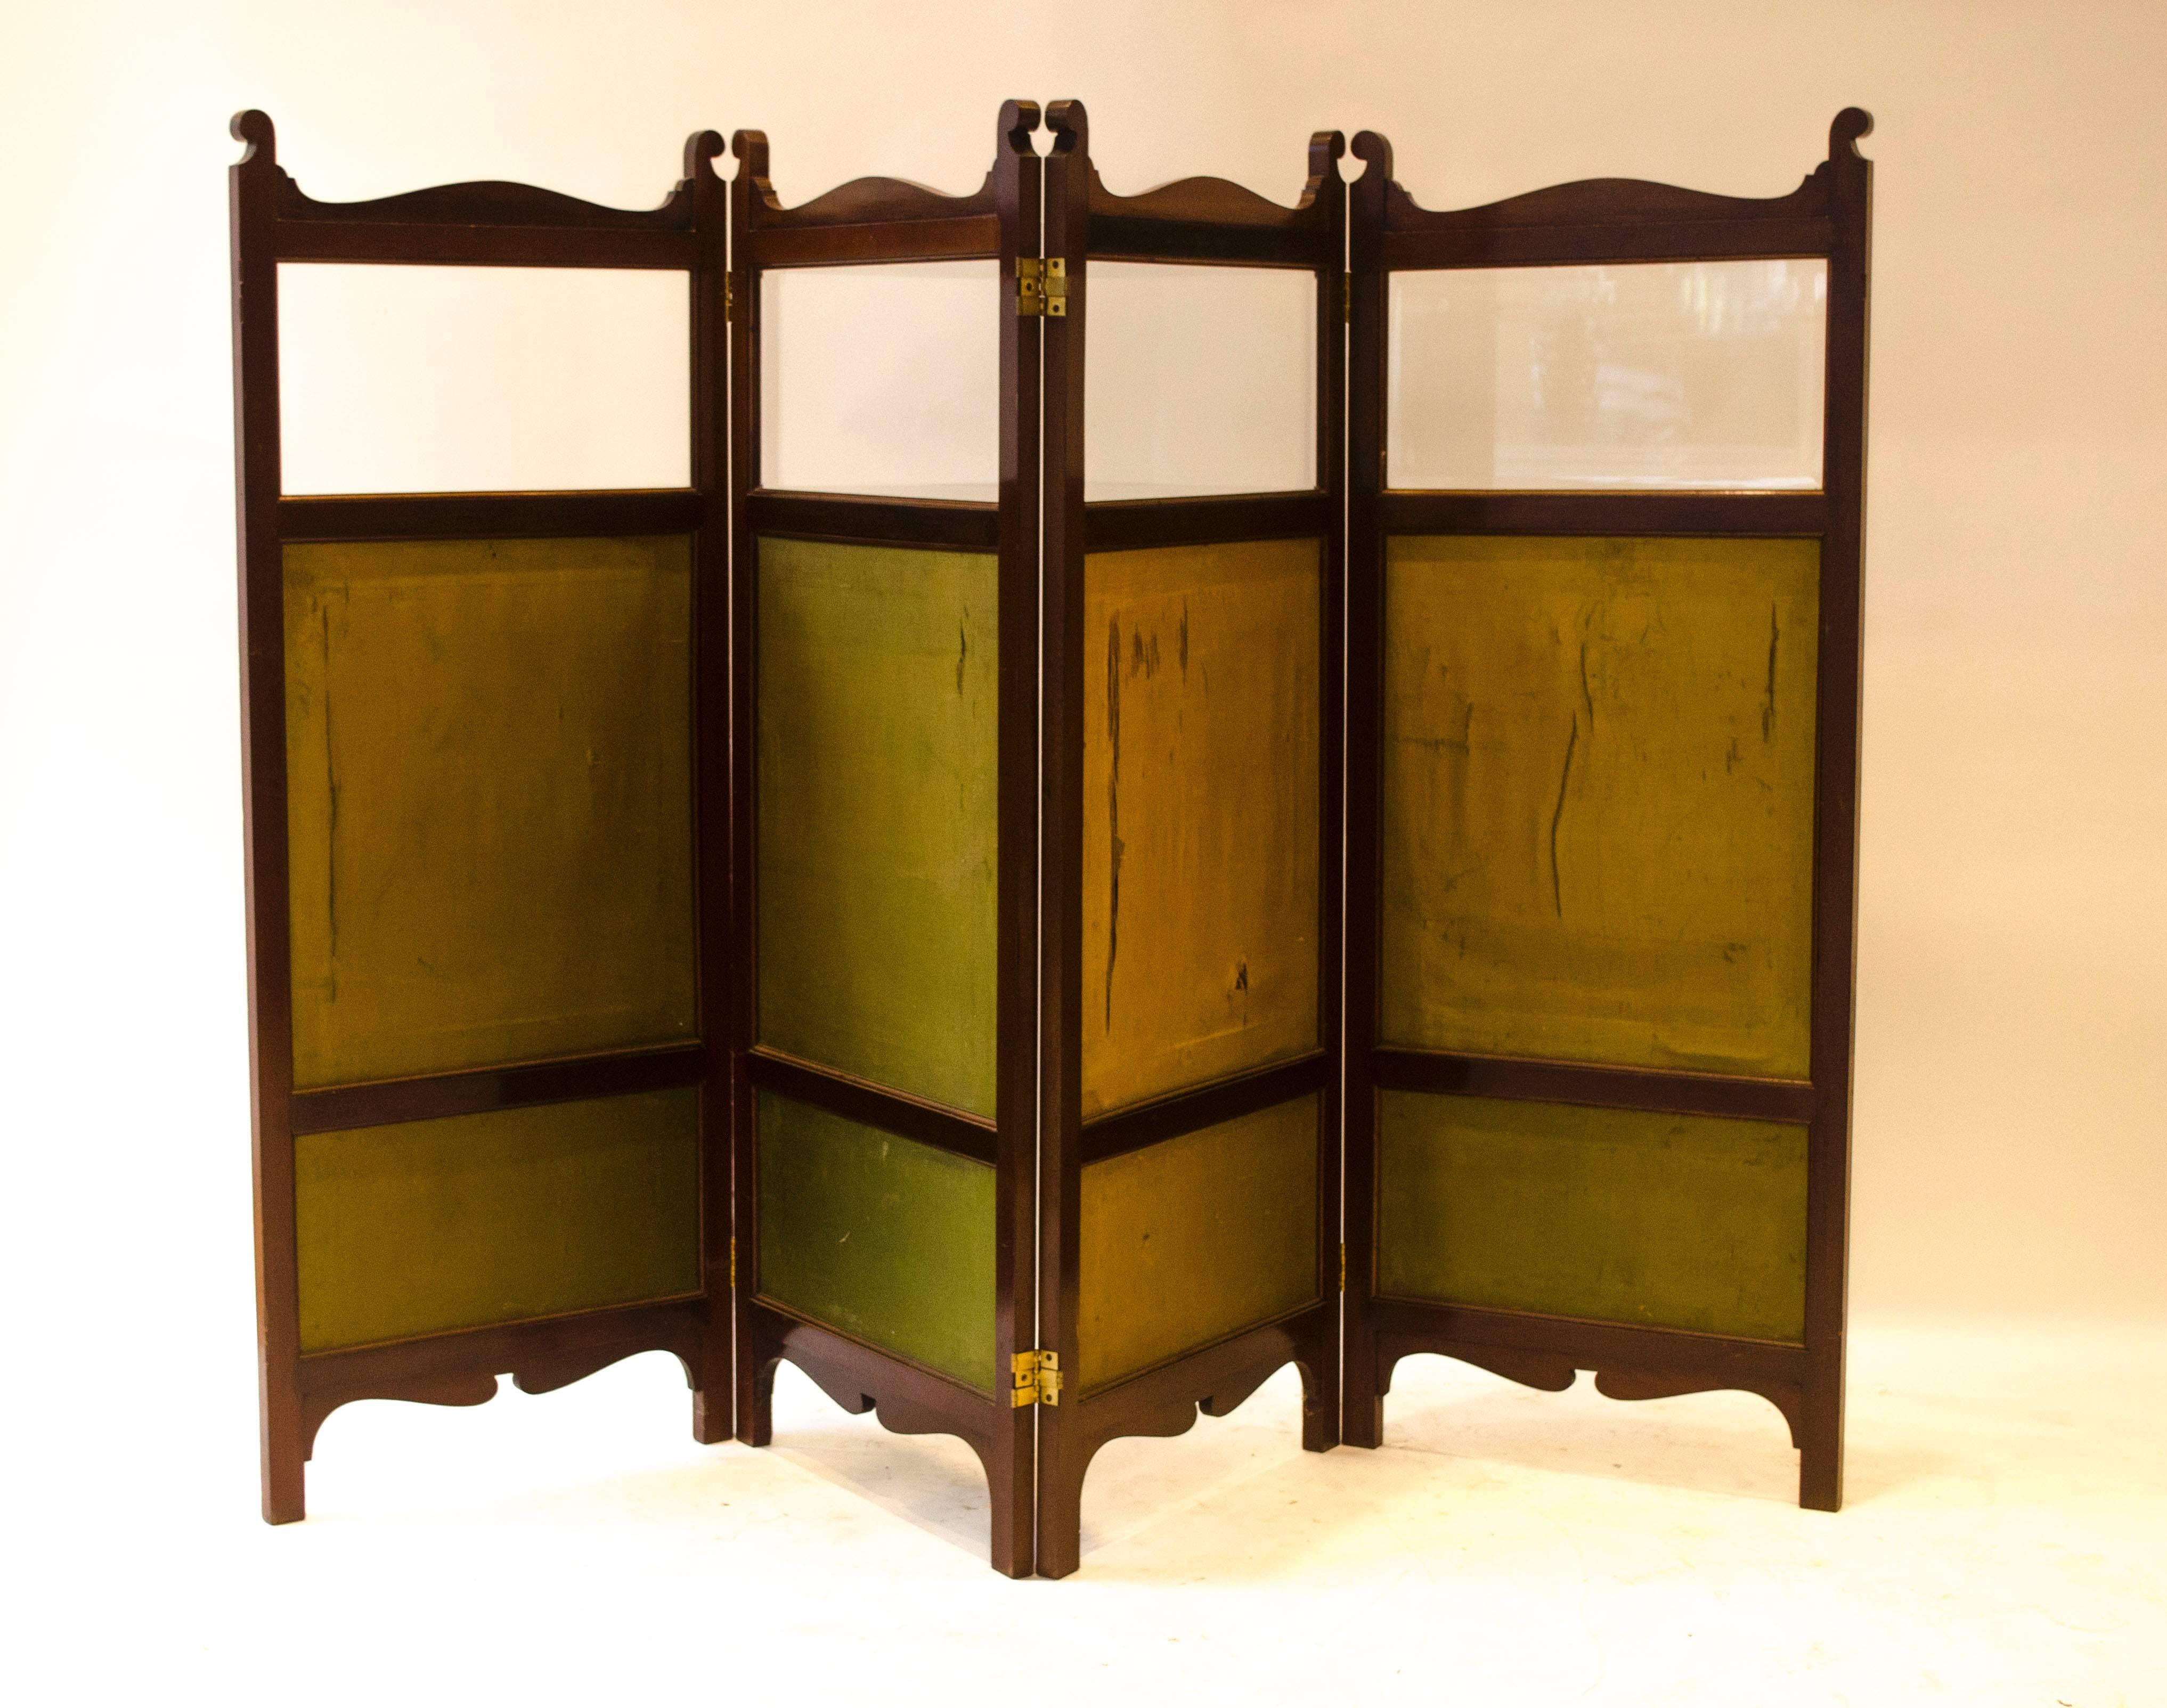 Edward William Godwin (attributed), a walnut four-fold screen, bevel glazed, with woven silk and velvet panels. This incorporates many design details of Godwin's Anglo-Japanese works. The woven silk and velvet panels as in the Godwin fire screen,